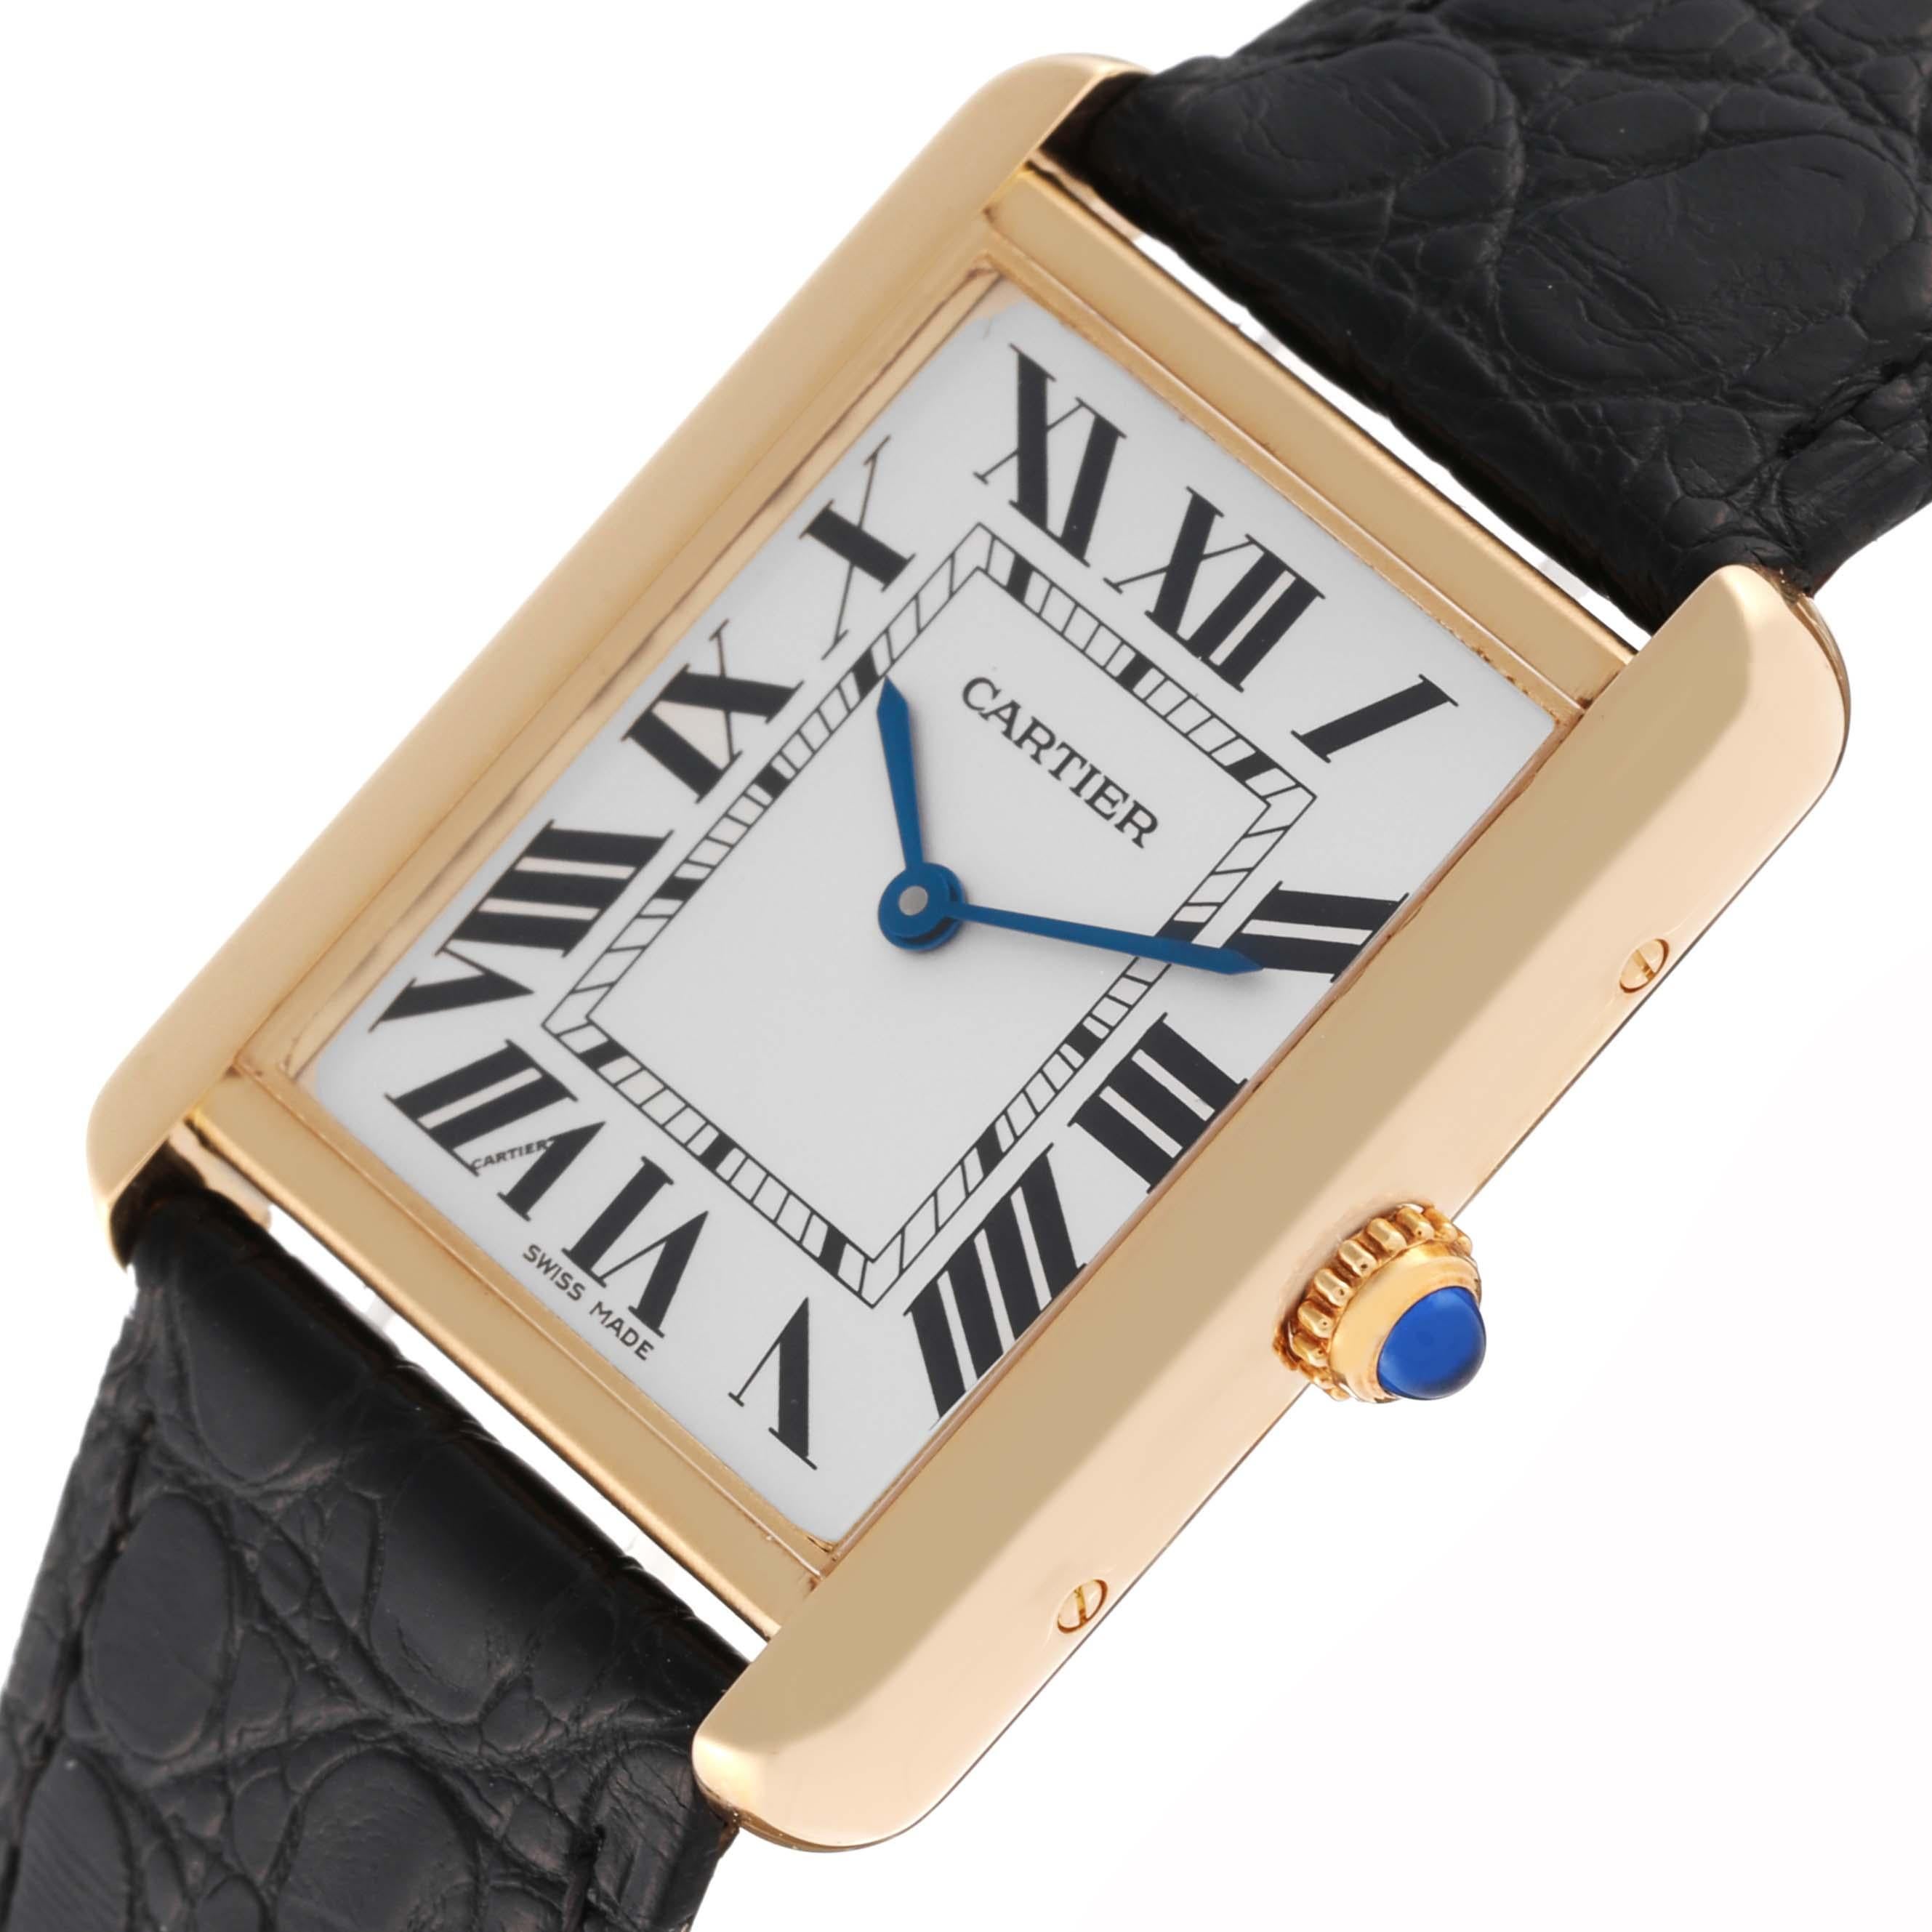 Cartier Tank Solo Large Yellow Gold Steel Mens Watch W5200004. Quartz movement. 18k yellow gold case 34 mm x 27 mm. Stainless steel caseback. Circular grained crown set with a blue spinel cabochon. . Scratch resistant sapphire crystal. Silver